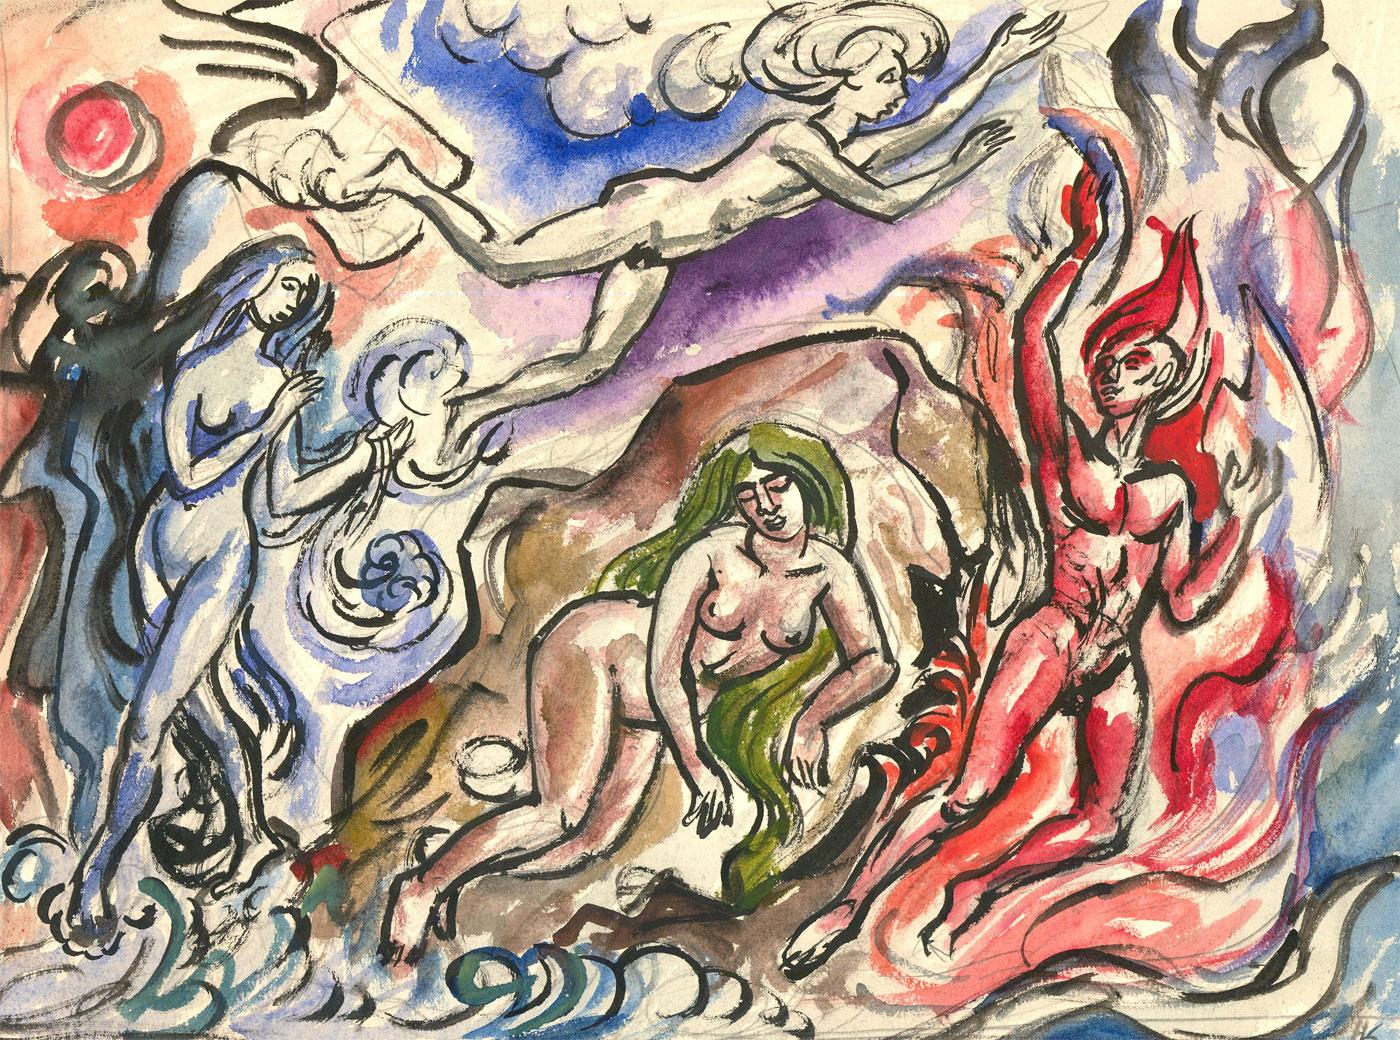 Nude Unknown - Helen Steinthal (1911-1991) - Aquarelle double face, vers les flammes